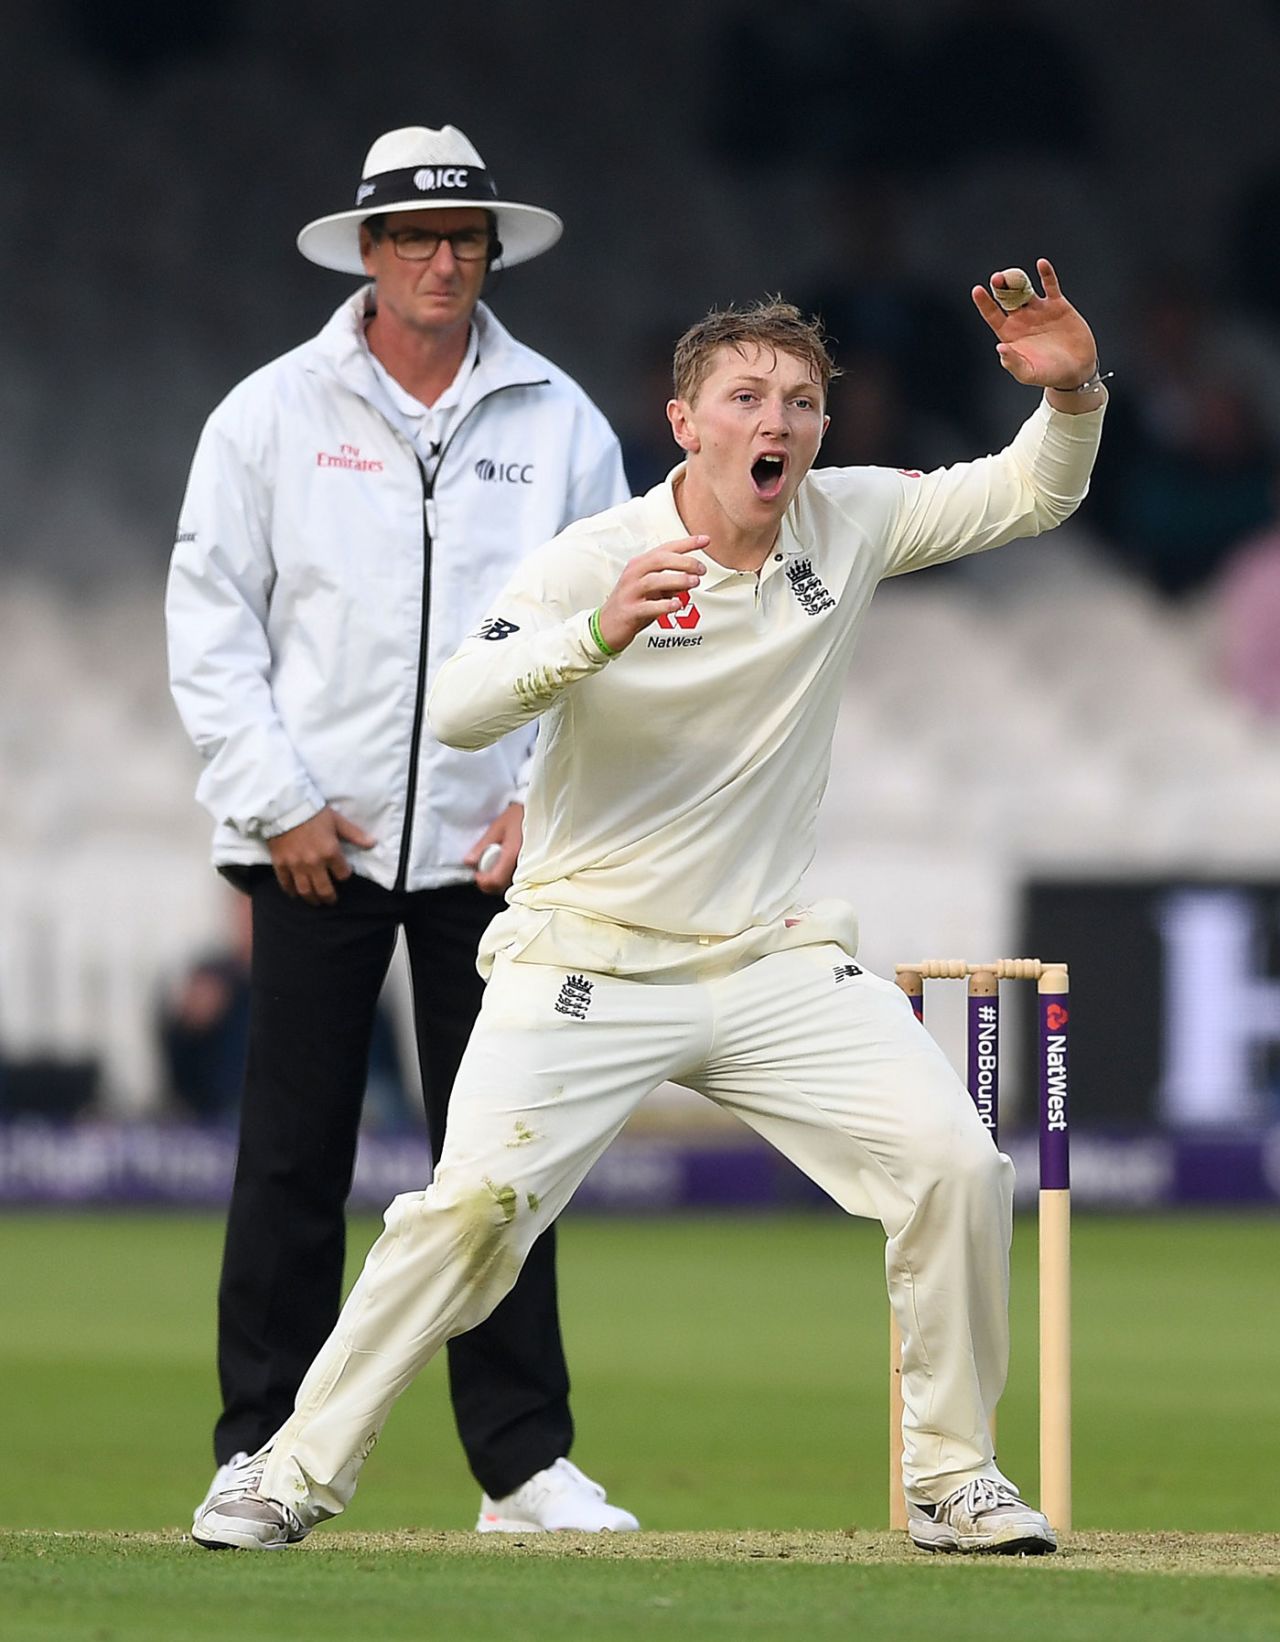 Dom Bess during his first over in Test cricket, England v Pakistan, 1st Test, Lord's, 1st day, May 24, 2018